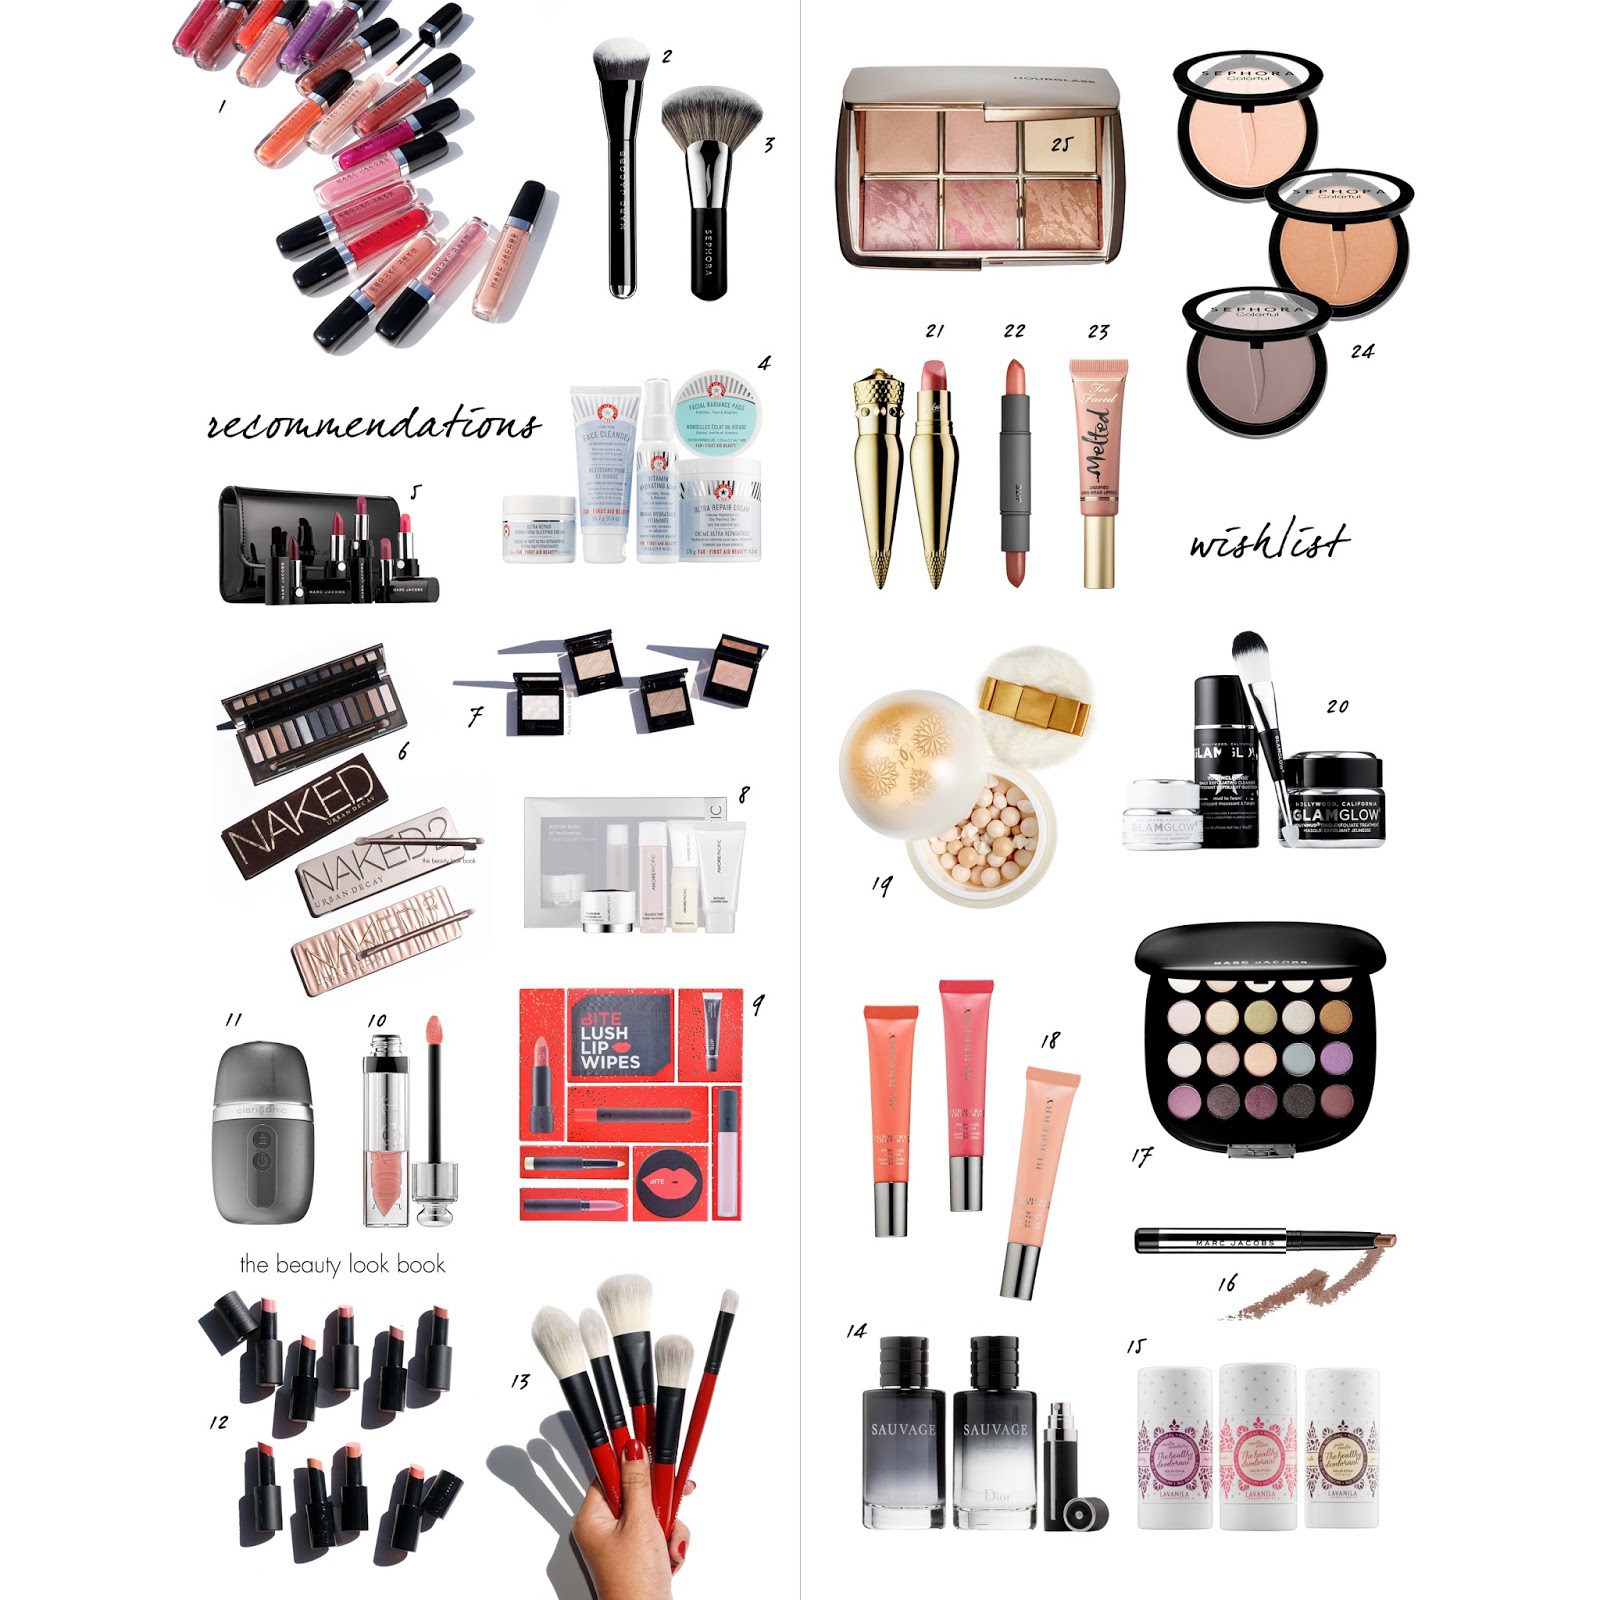 Sephora VIB Rouge/VIB 20% Off Sale Event Recommendations and